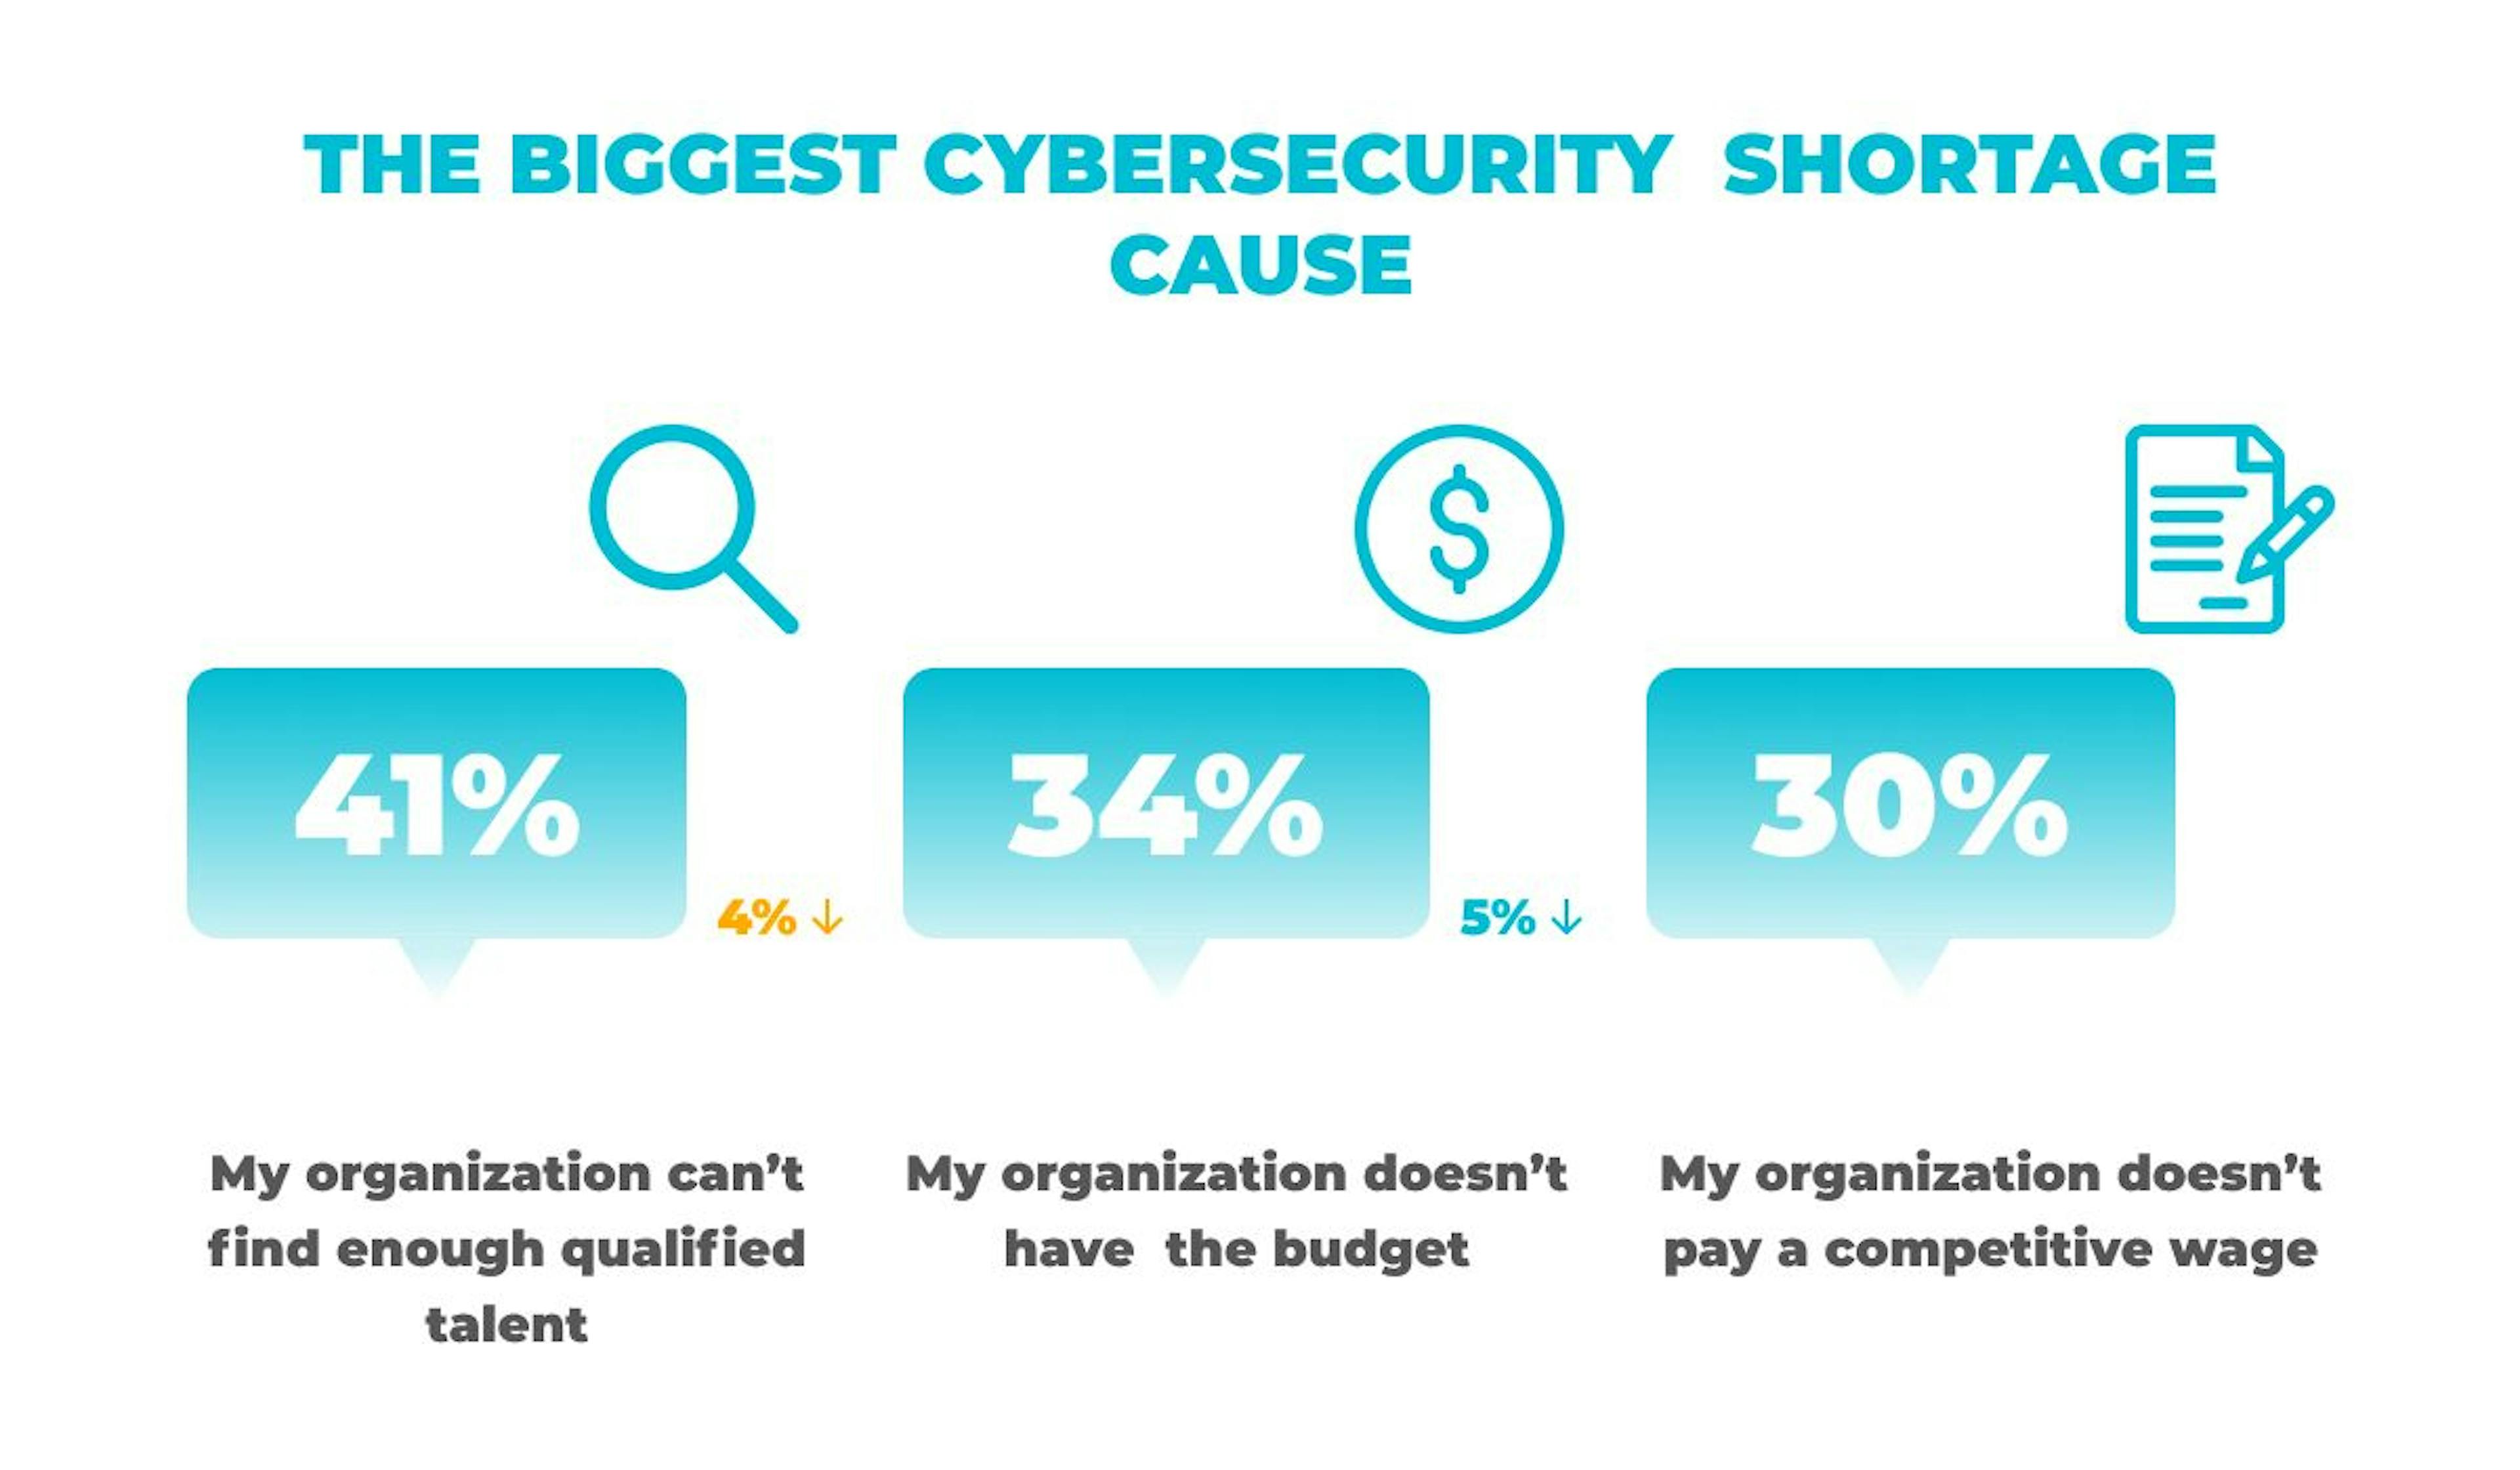 Source: ISC2 Cybersecurity Workforce Study